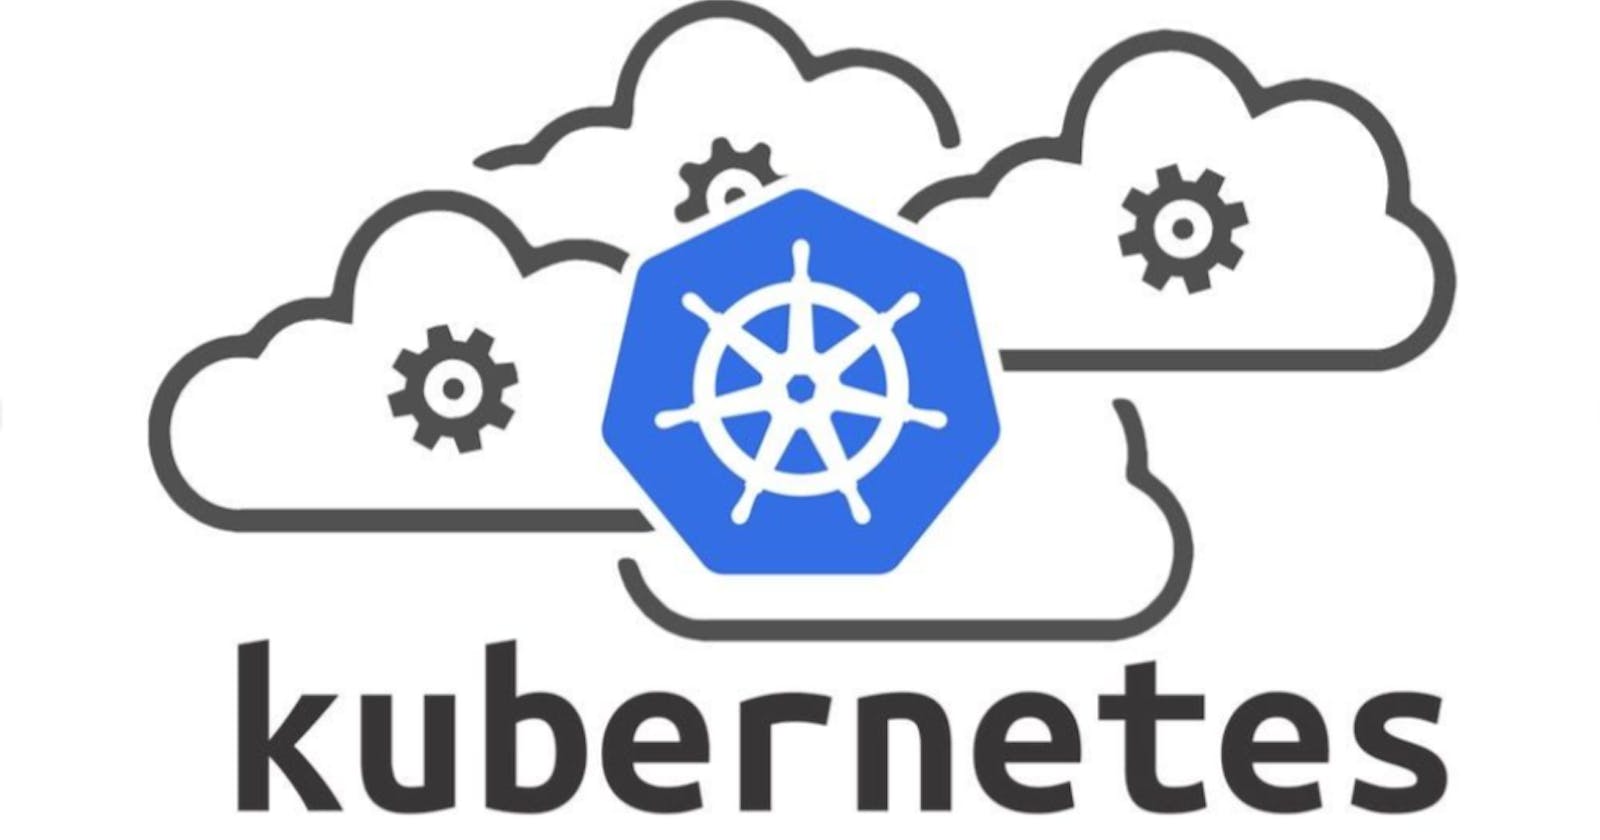 Launching your Kubernetes Cluster with Deployment